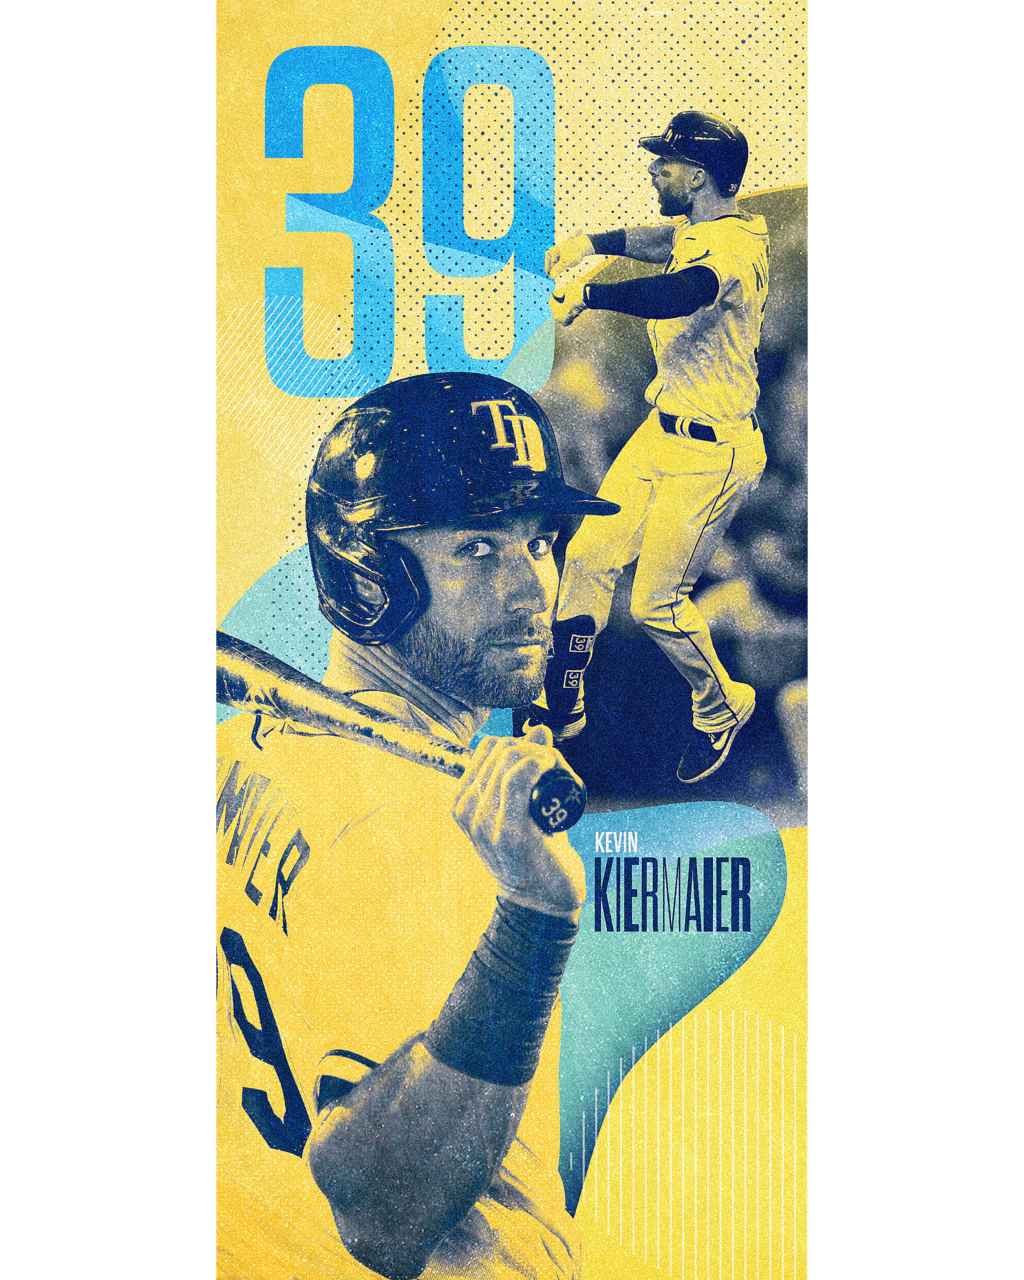 New wallpaper for your lock screen courtesy of the MLB twitter account! : r/ tampabayrays